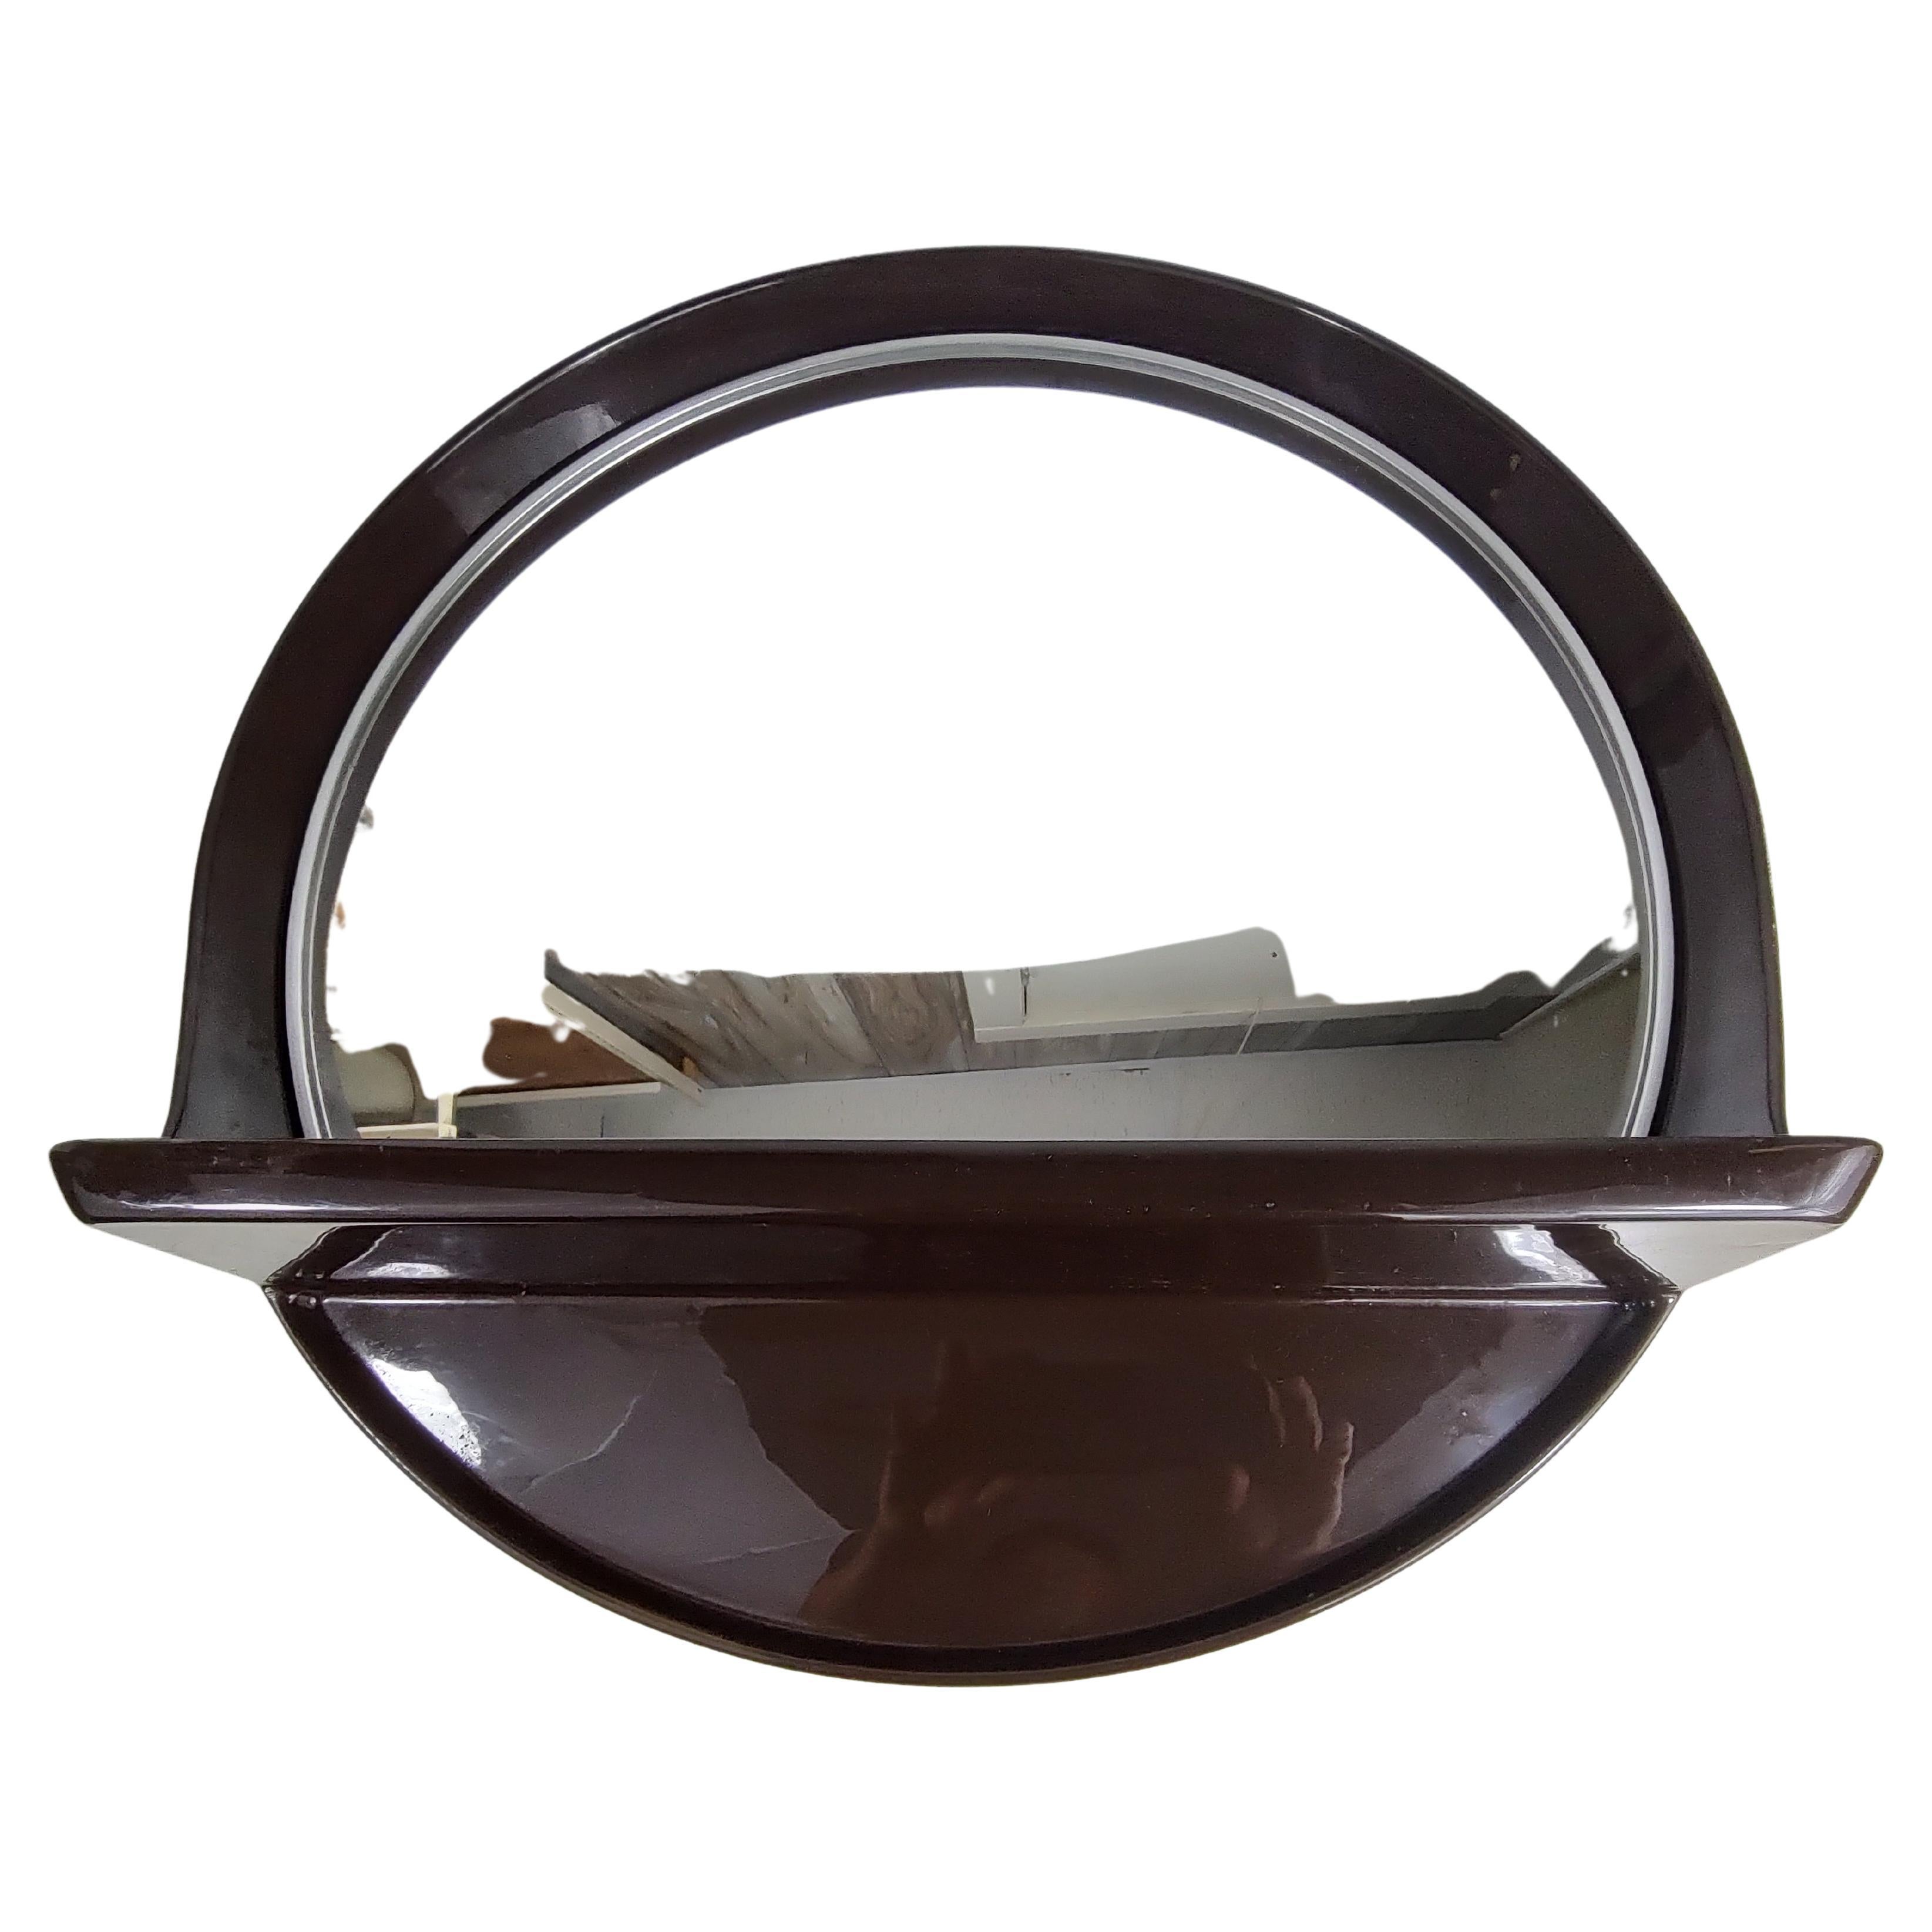 Fabulous one piece round mirror with built in shelf. In excellent vintage condition with minimal wear. Can be parcel posted. Shelf sits out about 4 inches. Labeled on back Collezione SALC Cantu Italy.